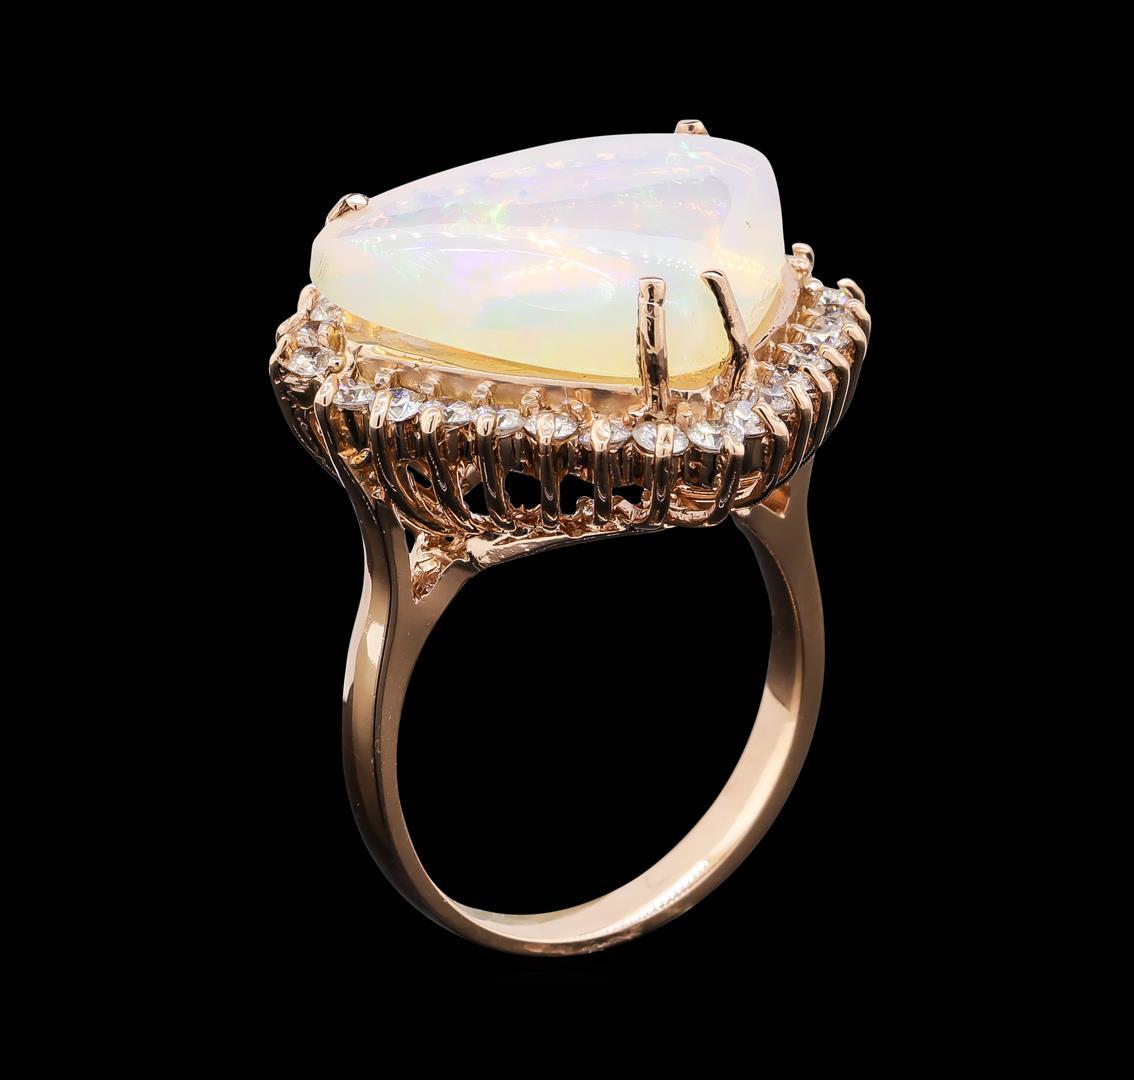 7.51 ctw Opal and Diamond Ring - 14KT Rose Gold